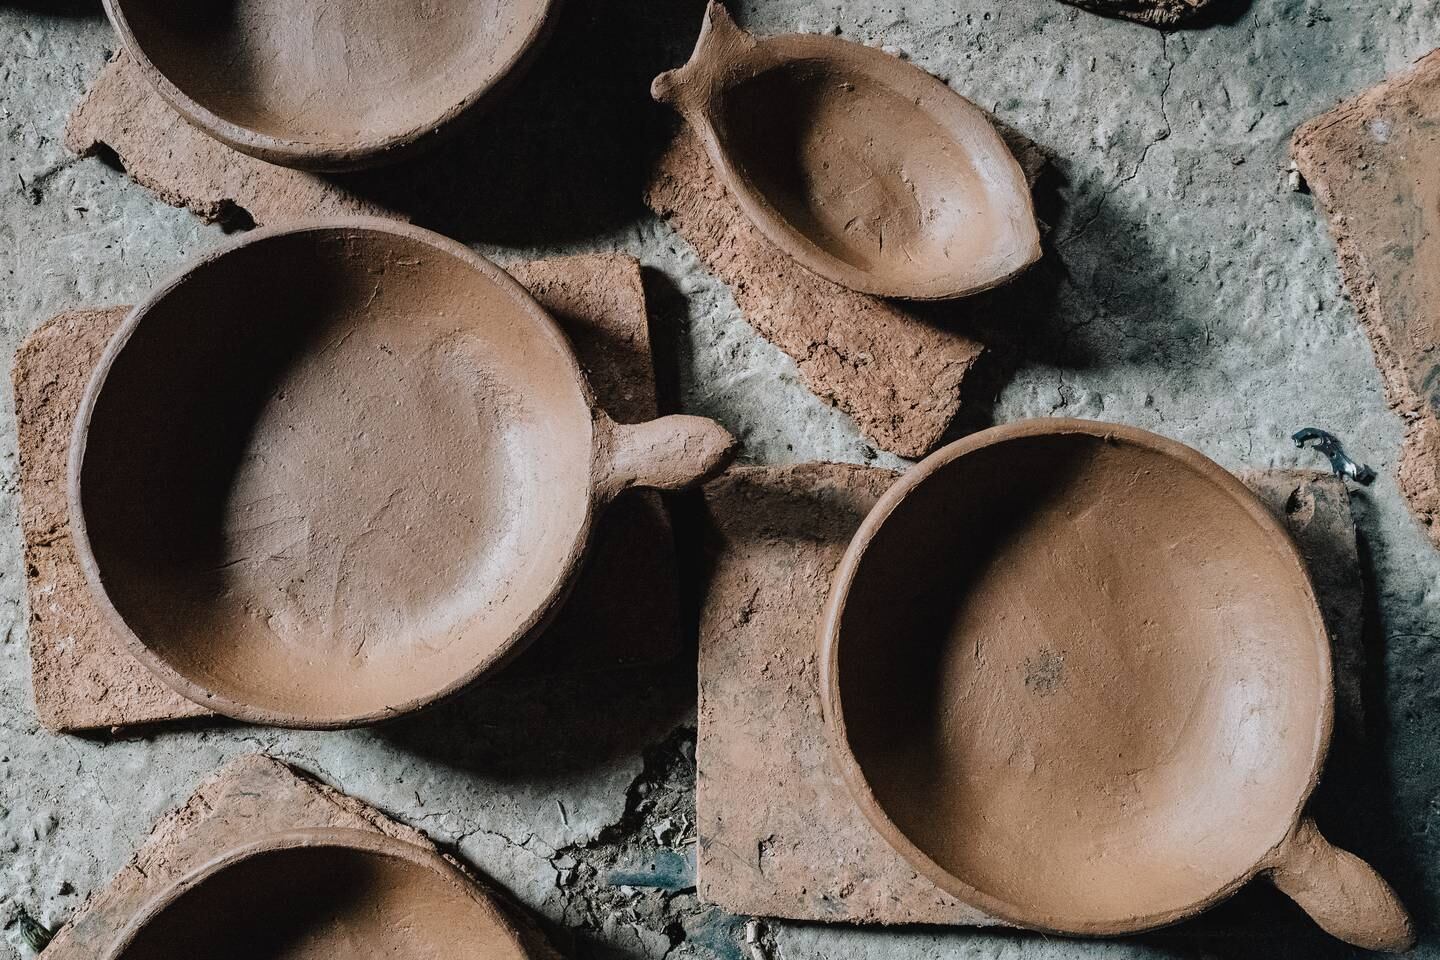 Traditional motifs and forms, including fish, turtles, frogs and female shapes, inform much of the region's pottery. Erin Clare Brown / The National